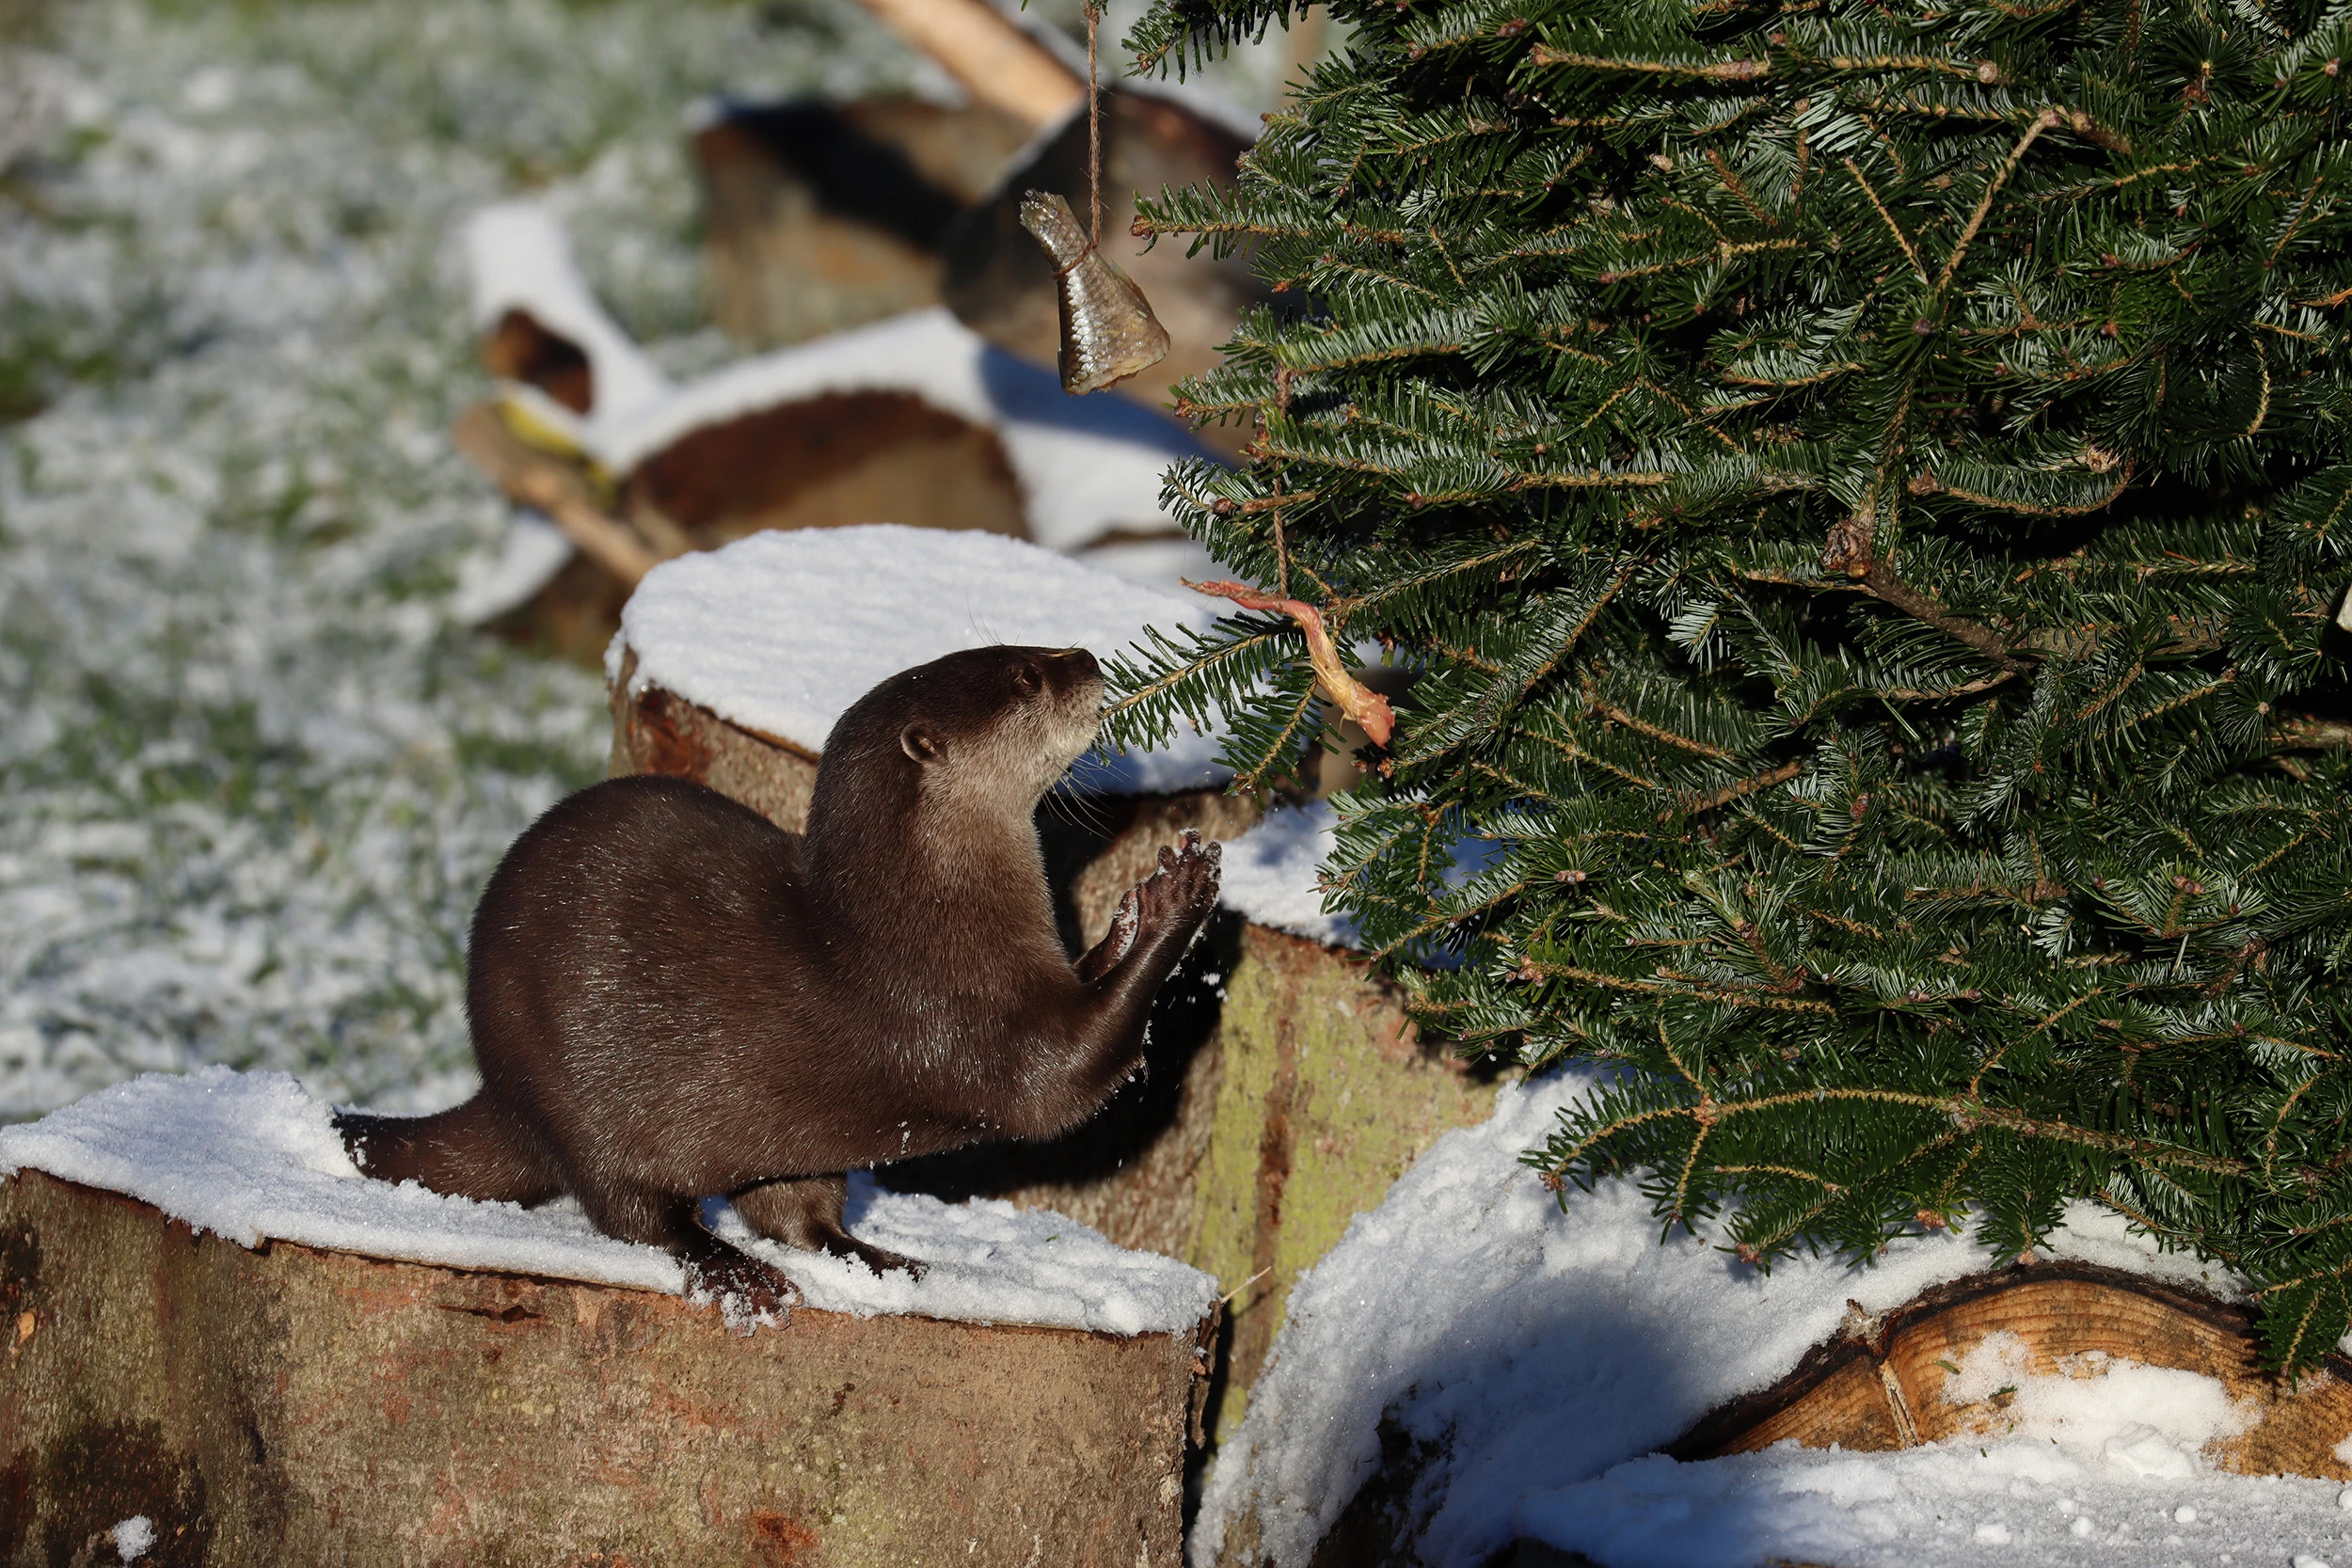 Otter enjoying the donated trees from The Alnwick Garden